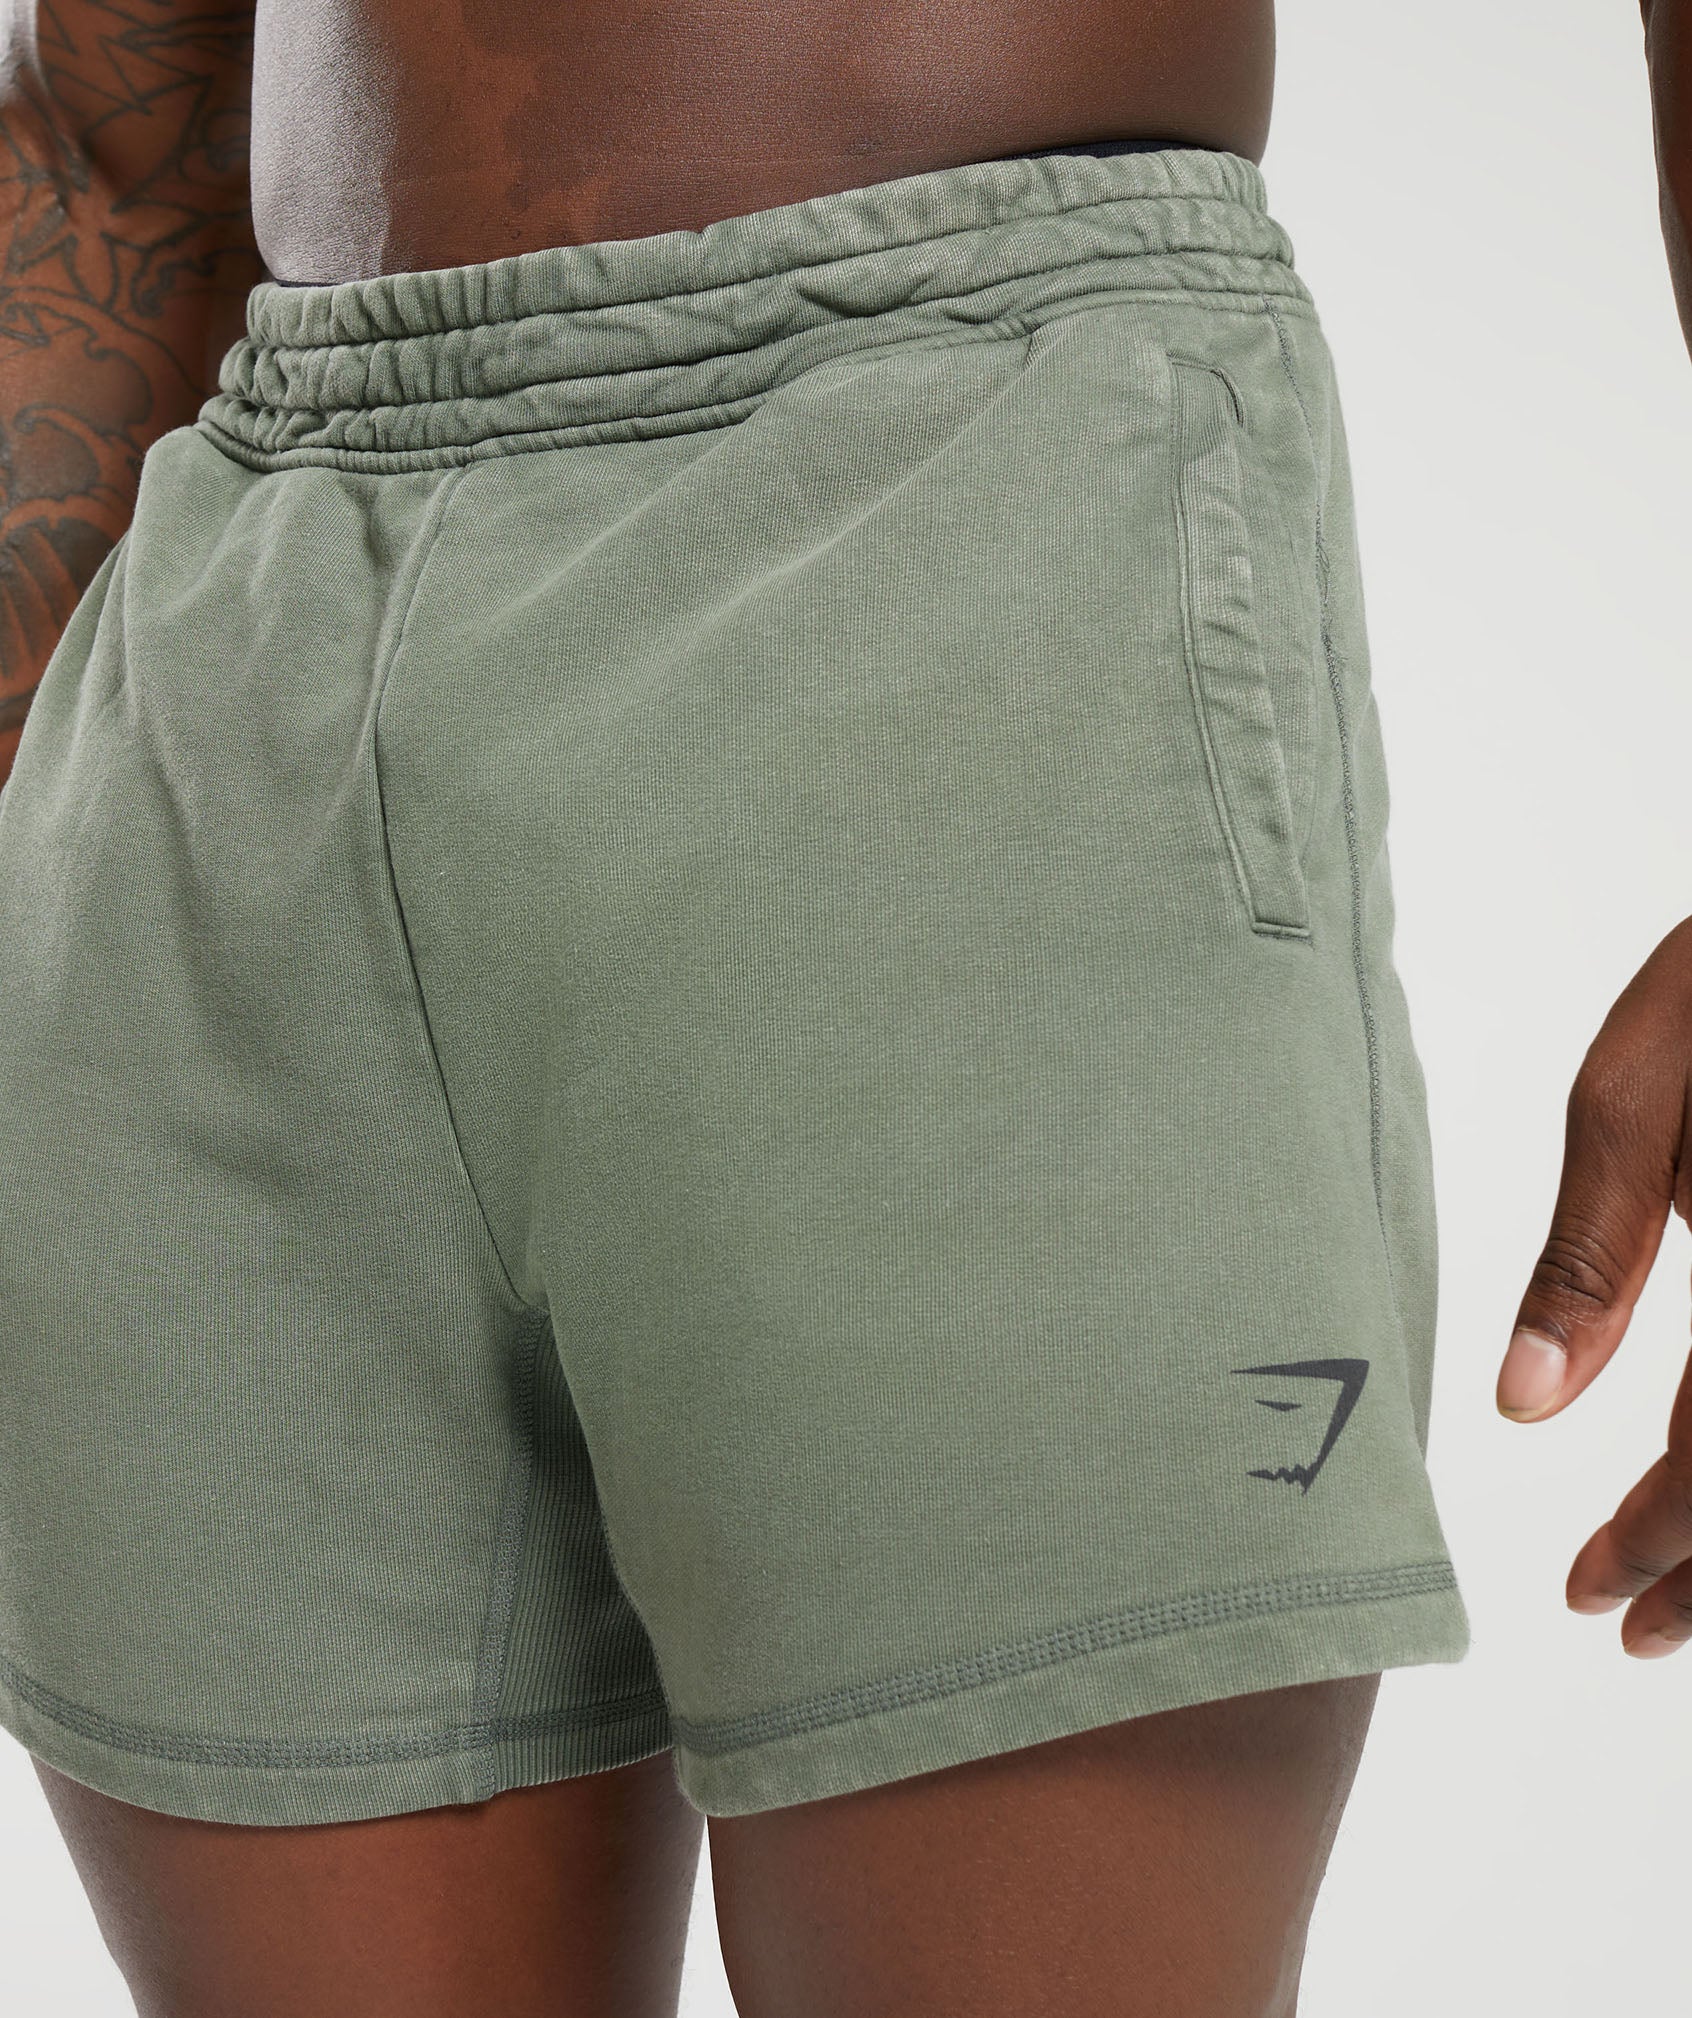 Heritage 5" Shorts in Dusk Green - view 5